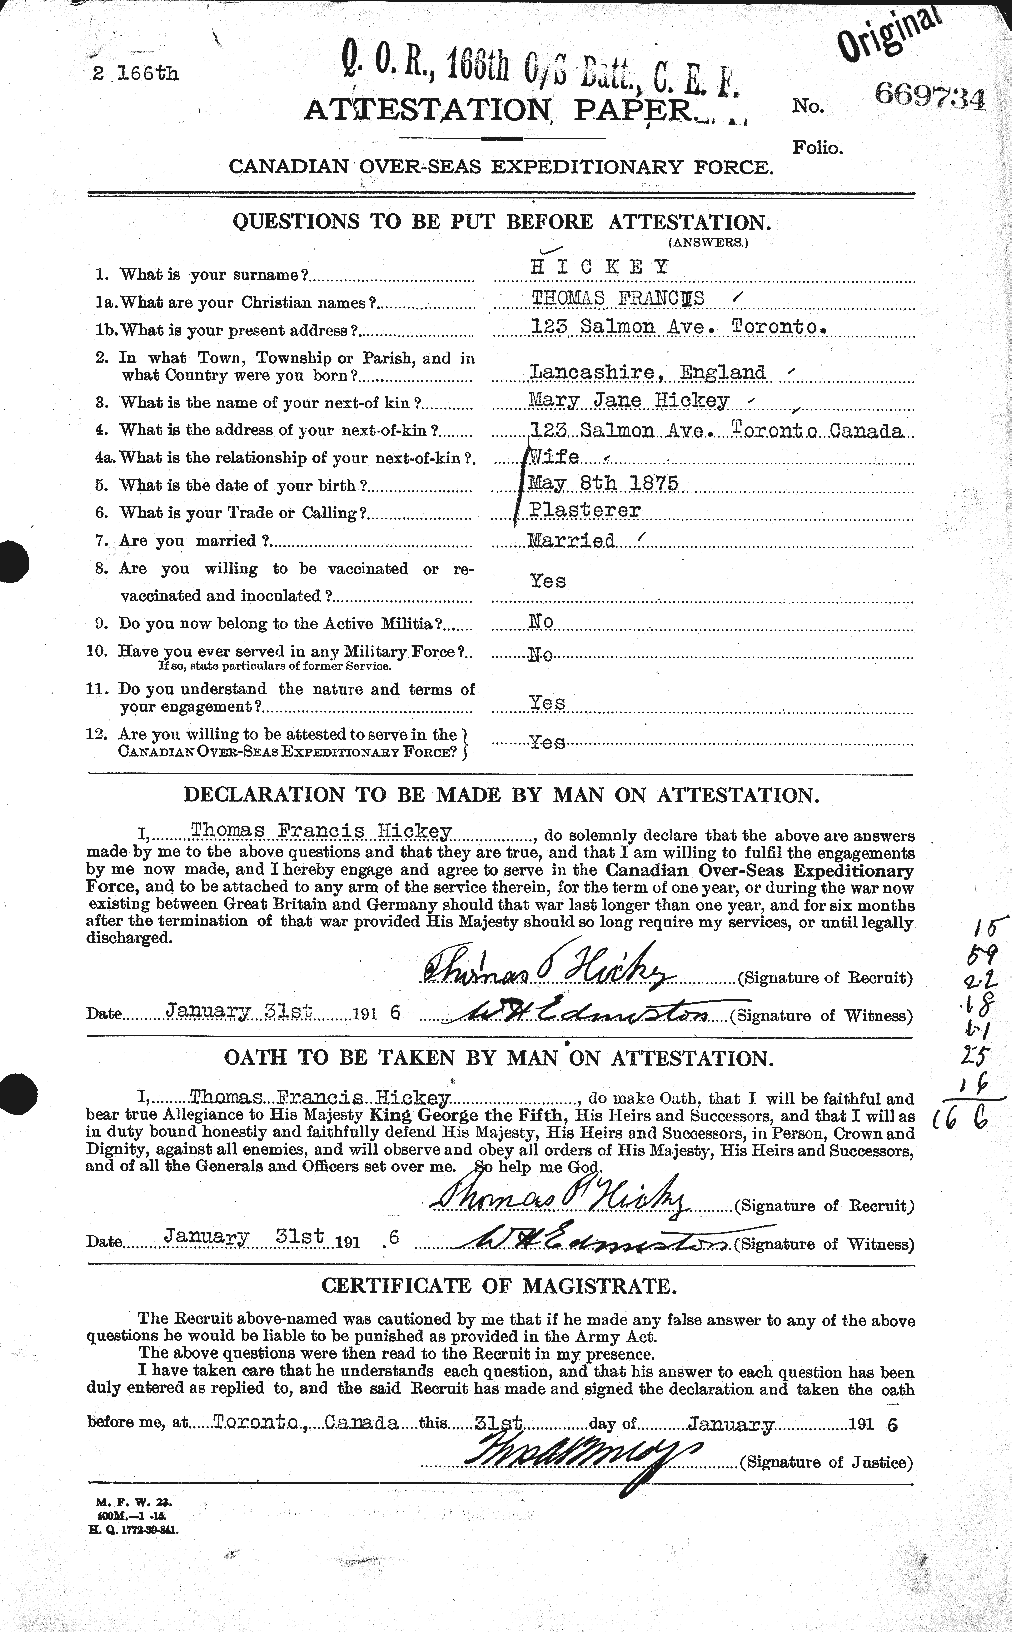 Personnel Records of the First World War - CEF 388925a